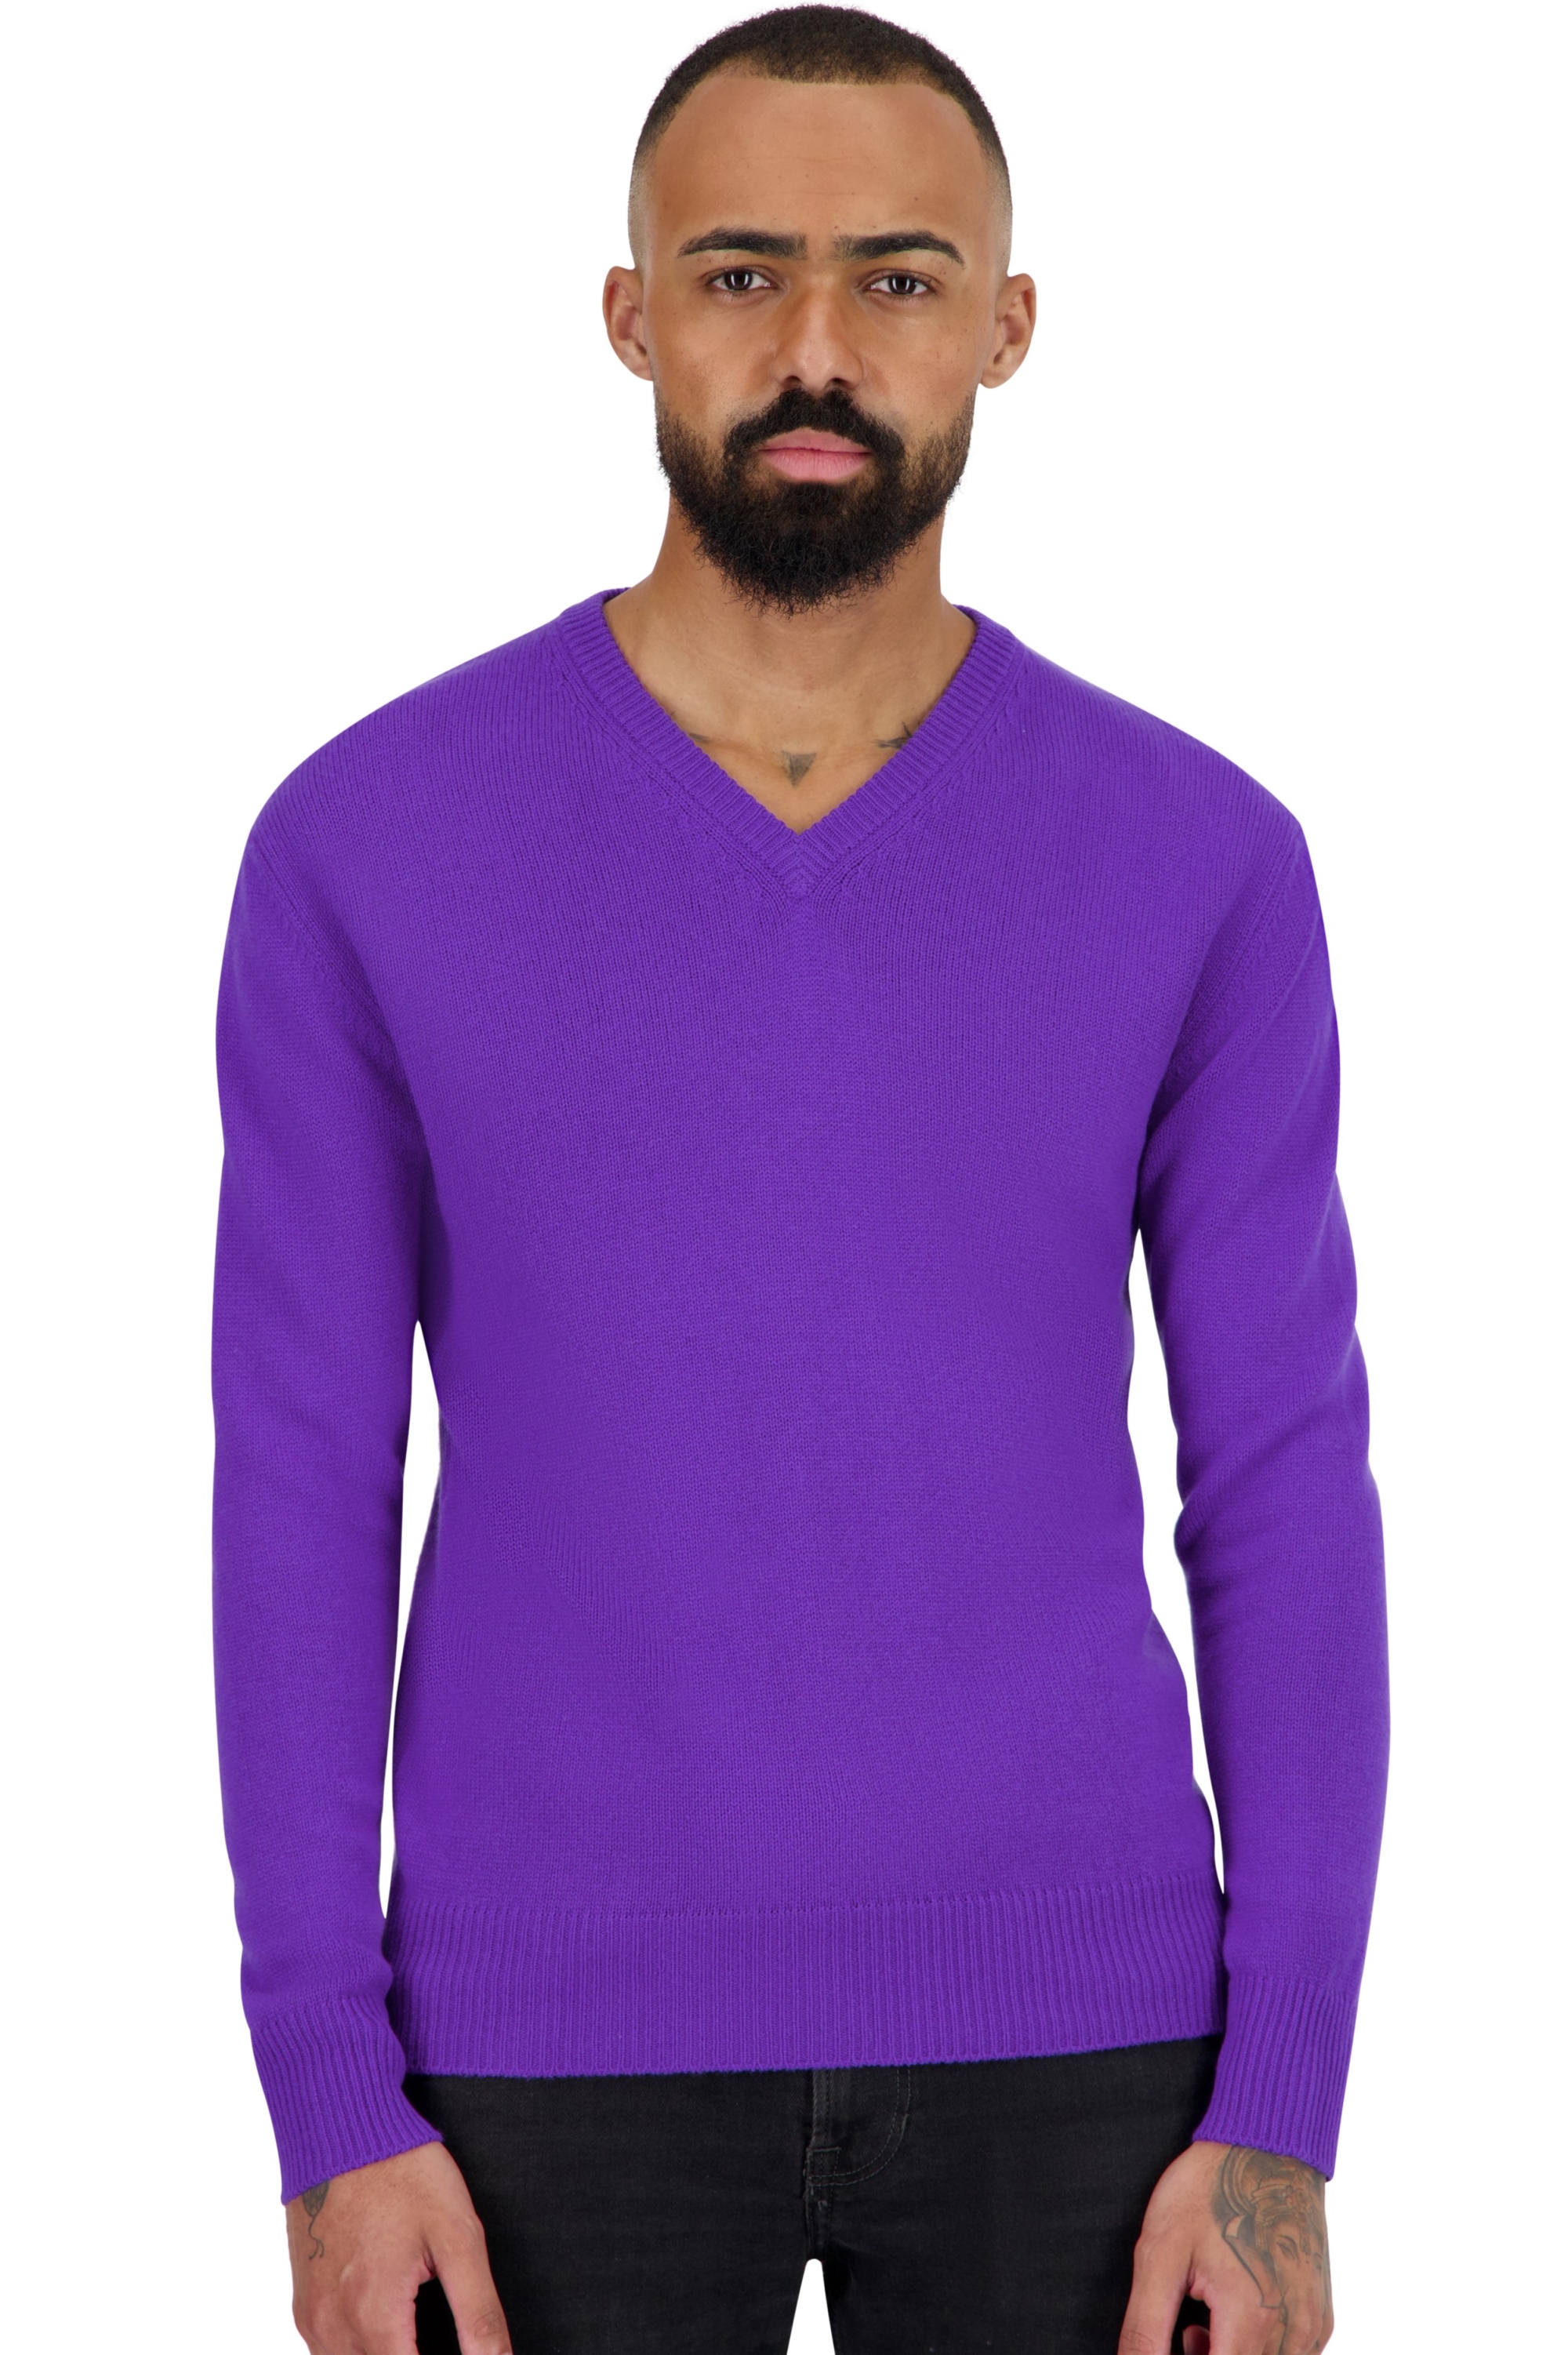 Cashmere men basic sweaters at low prices tour first regent 2xl